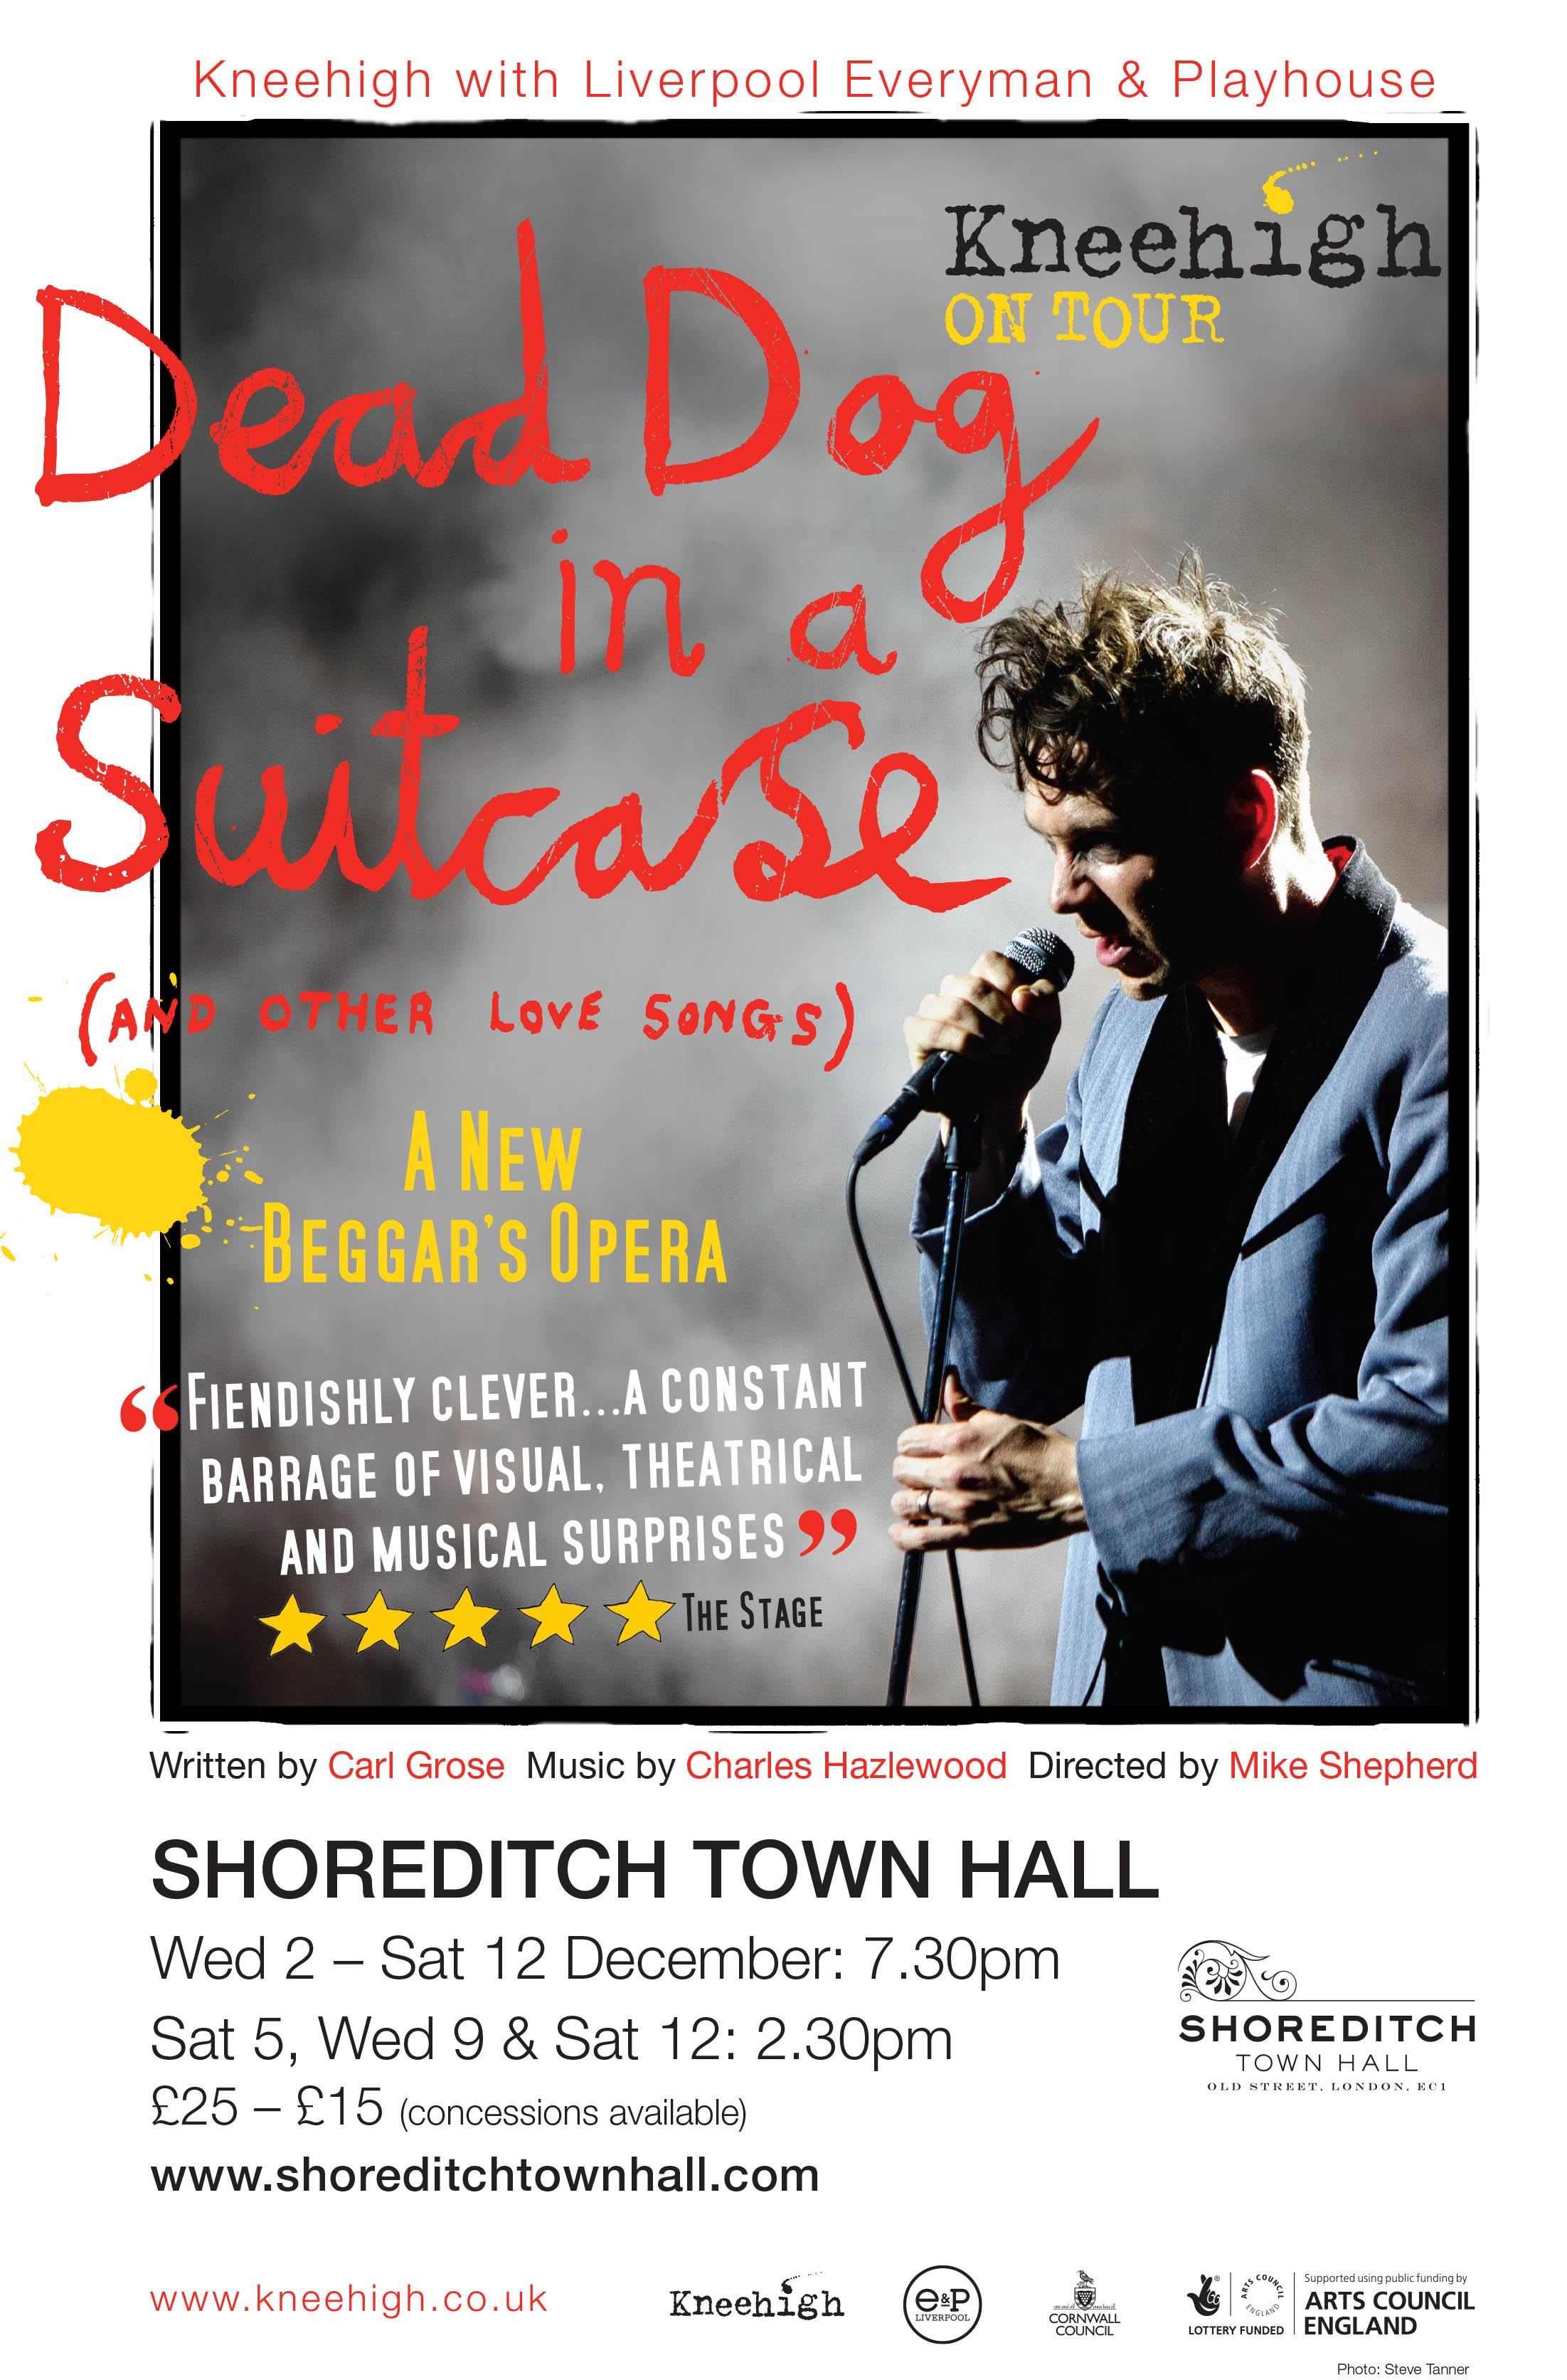 Promotional poster for 'dead dog in a suitcase (and other love songs)', a modern beggar's opera by kneehigh theatre, featuring an intense performer with a microphone.